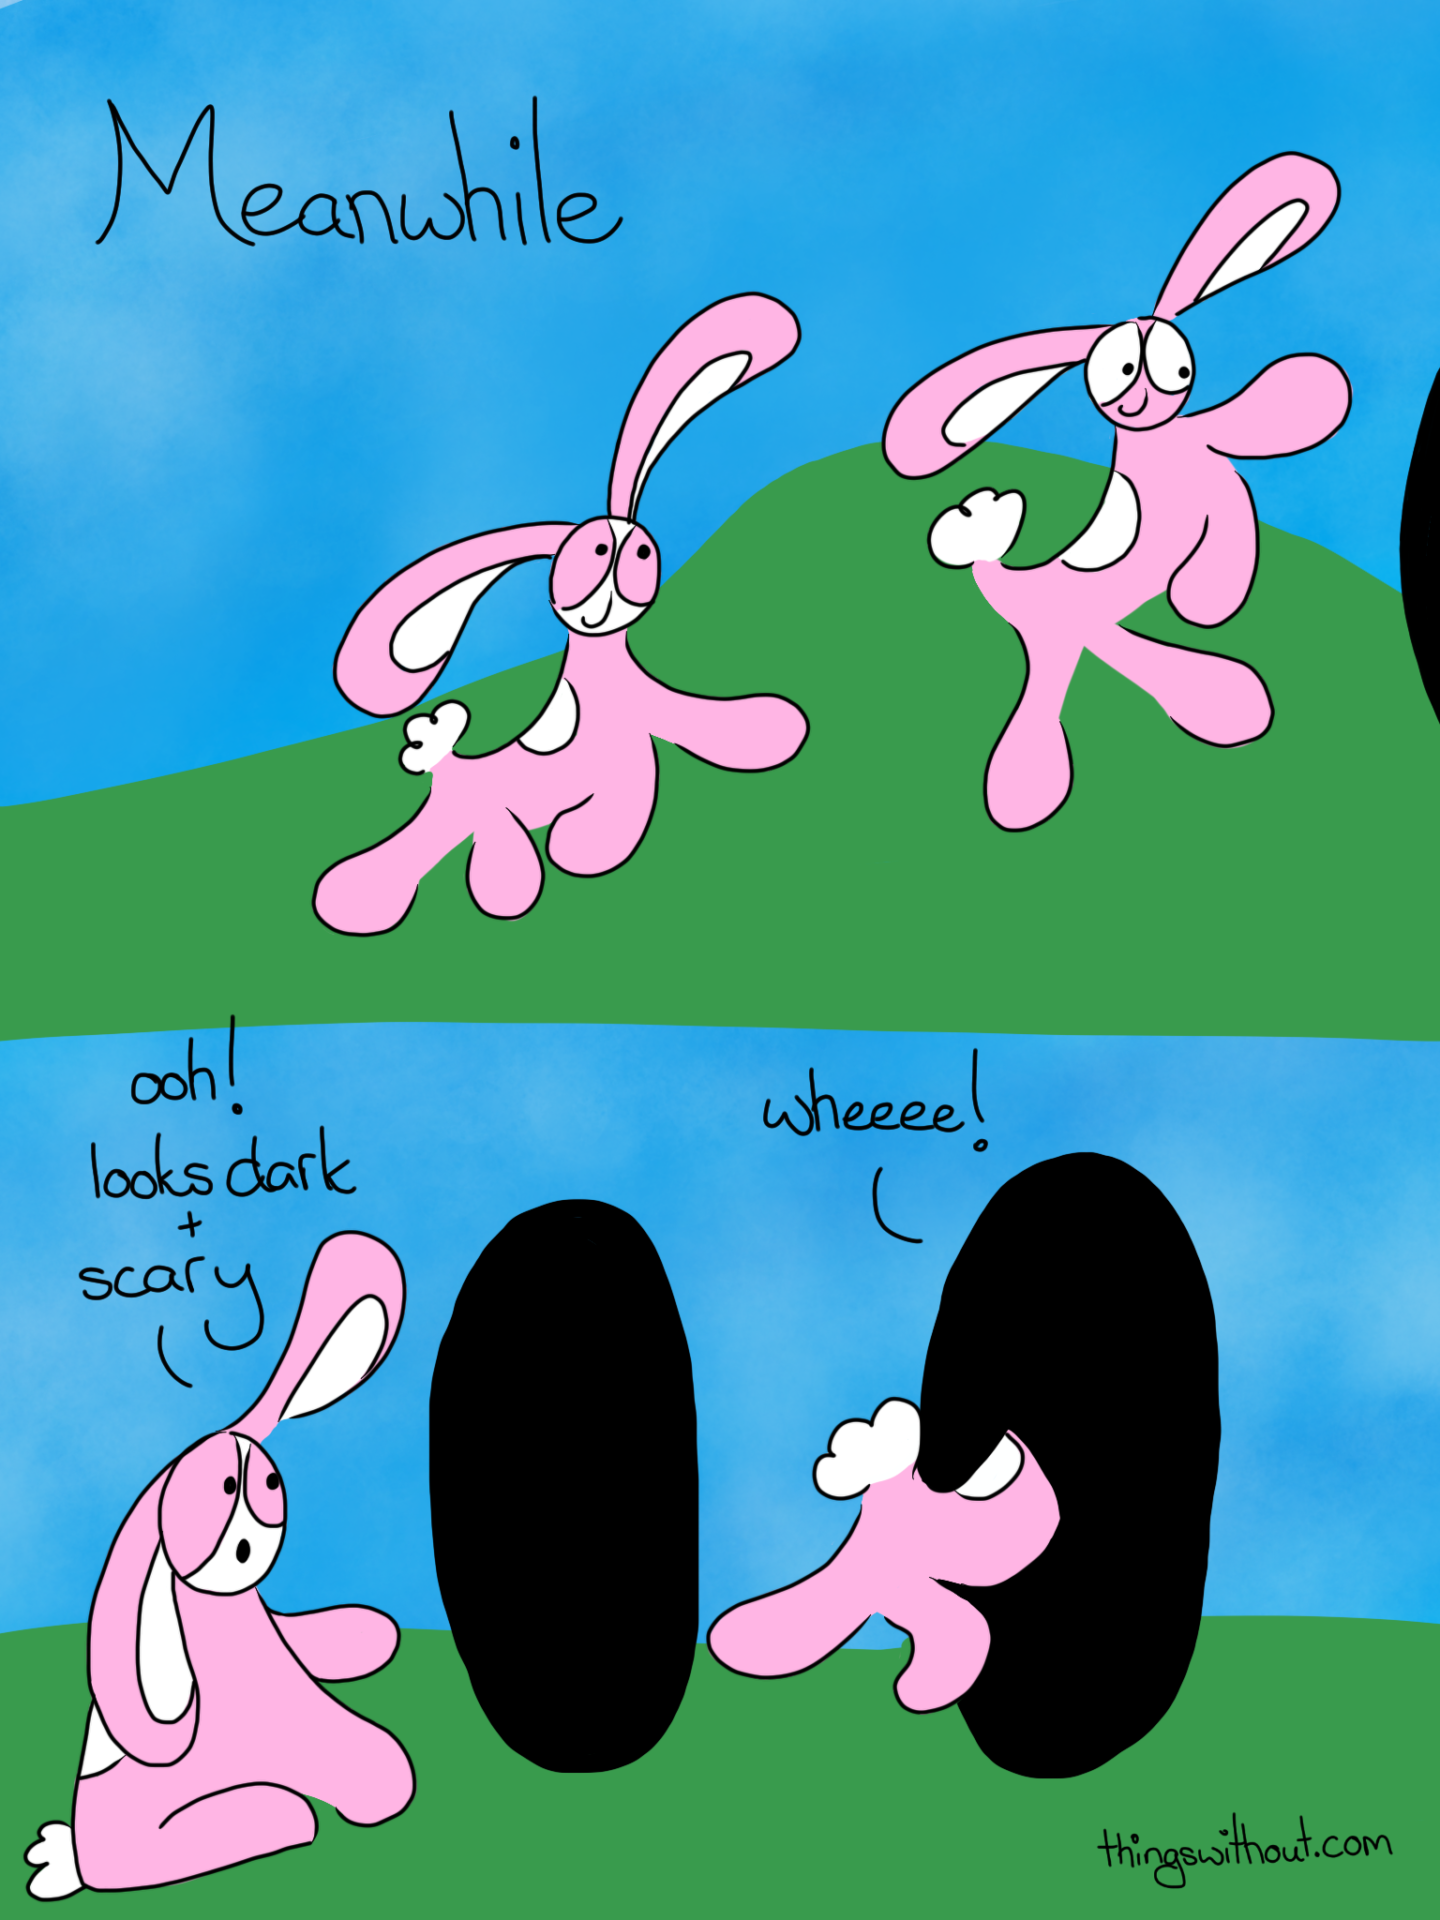 447: The ongoing adventures of Bunson, a small pink bunny.